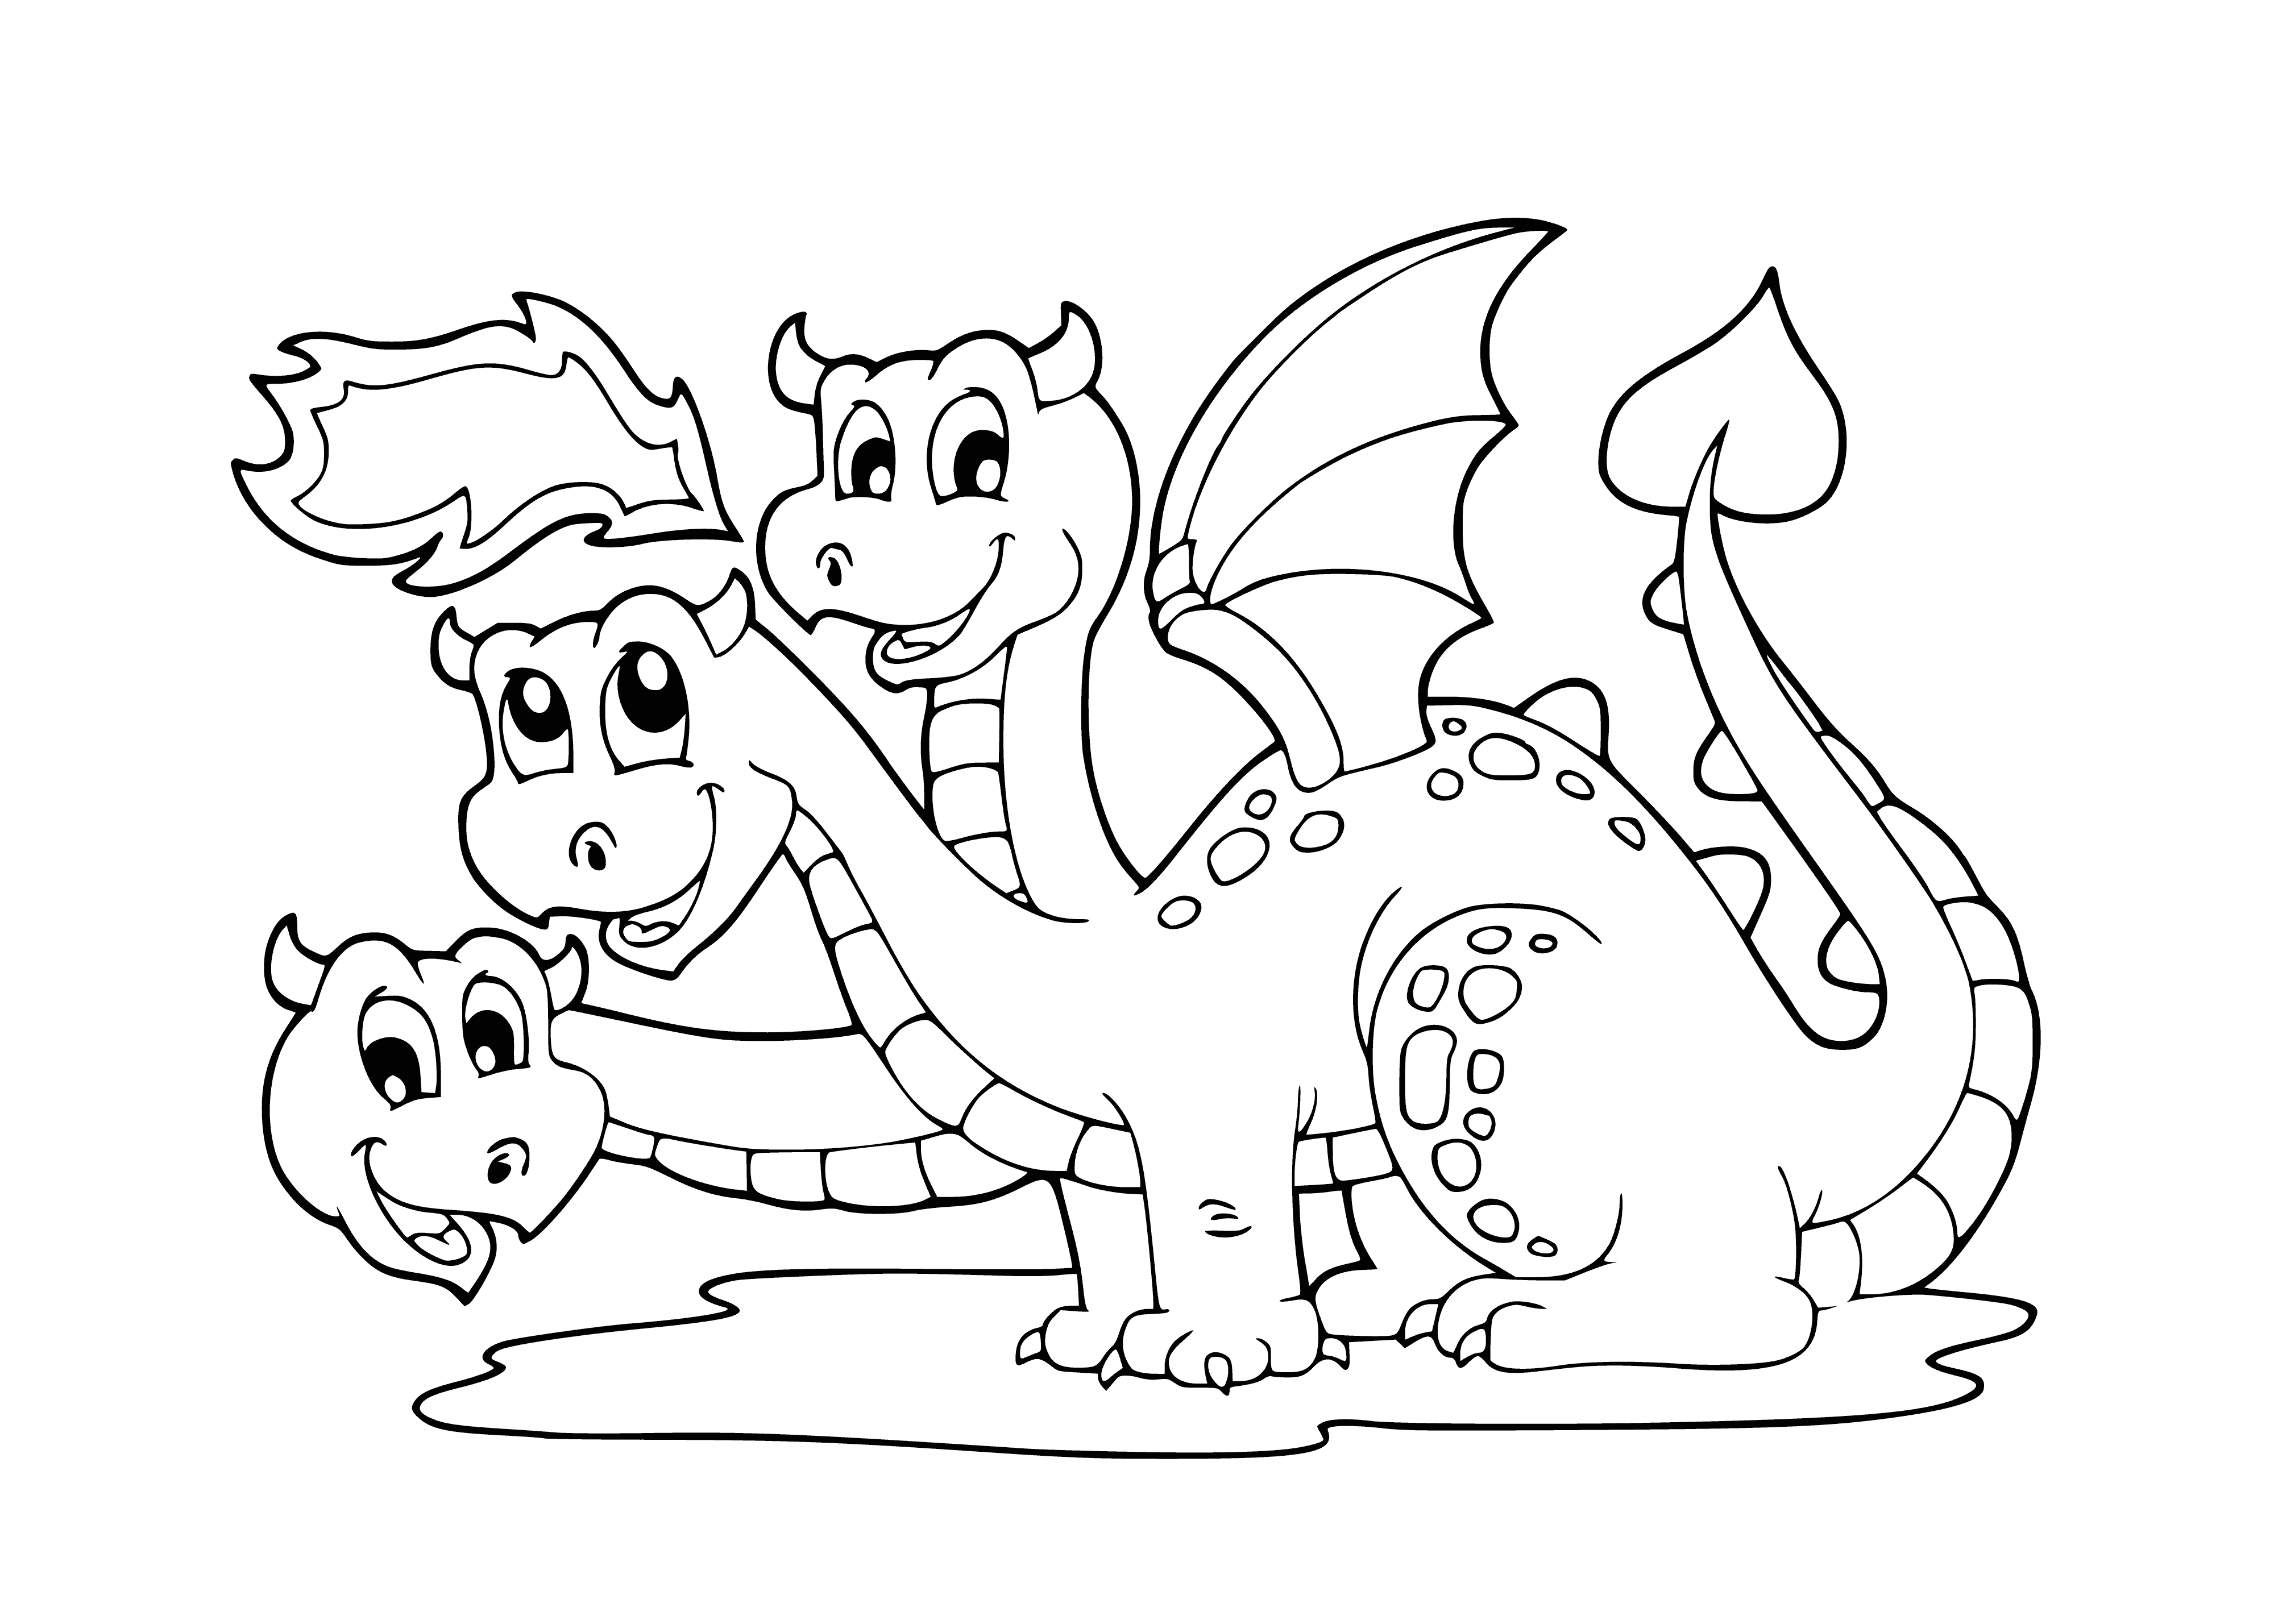 Three-headed dragon coloring page